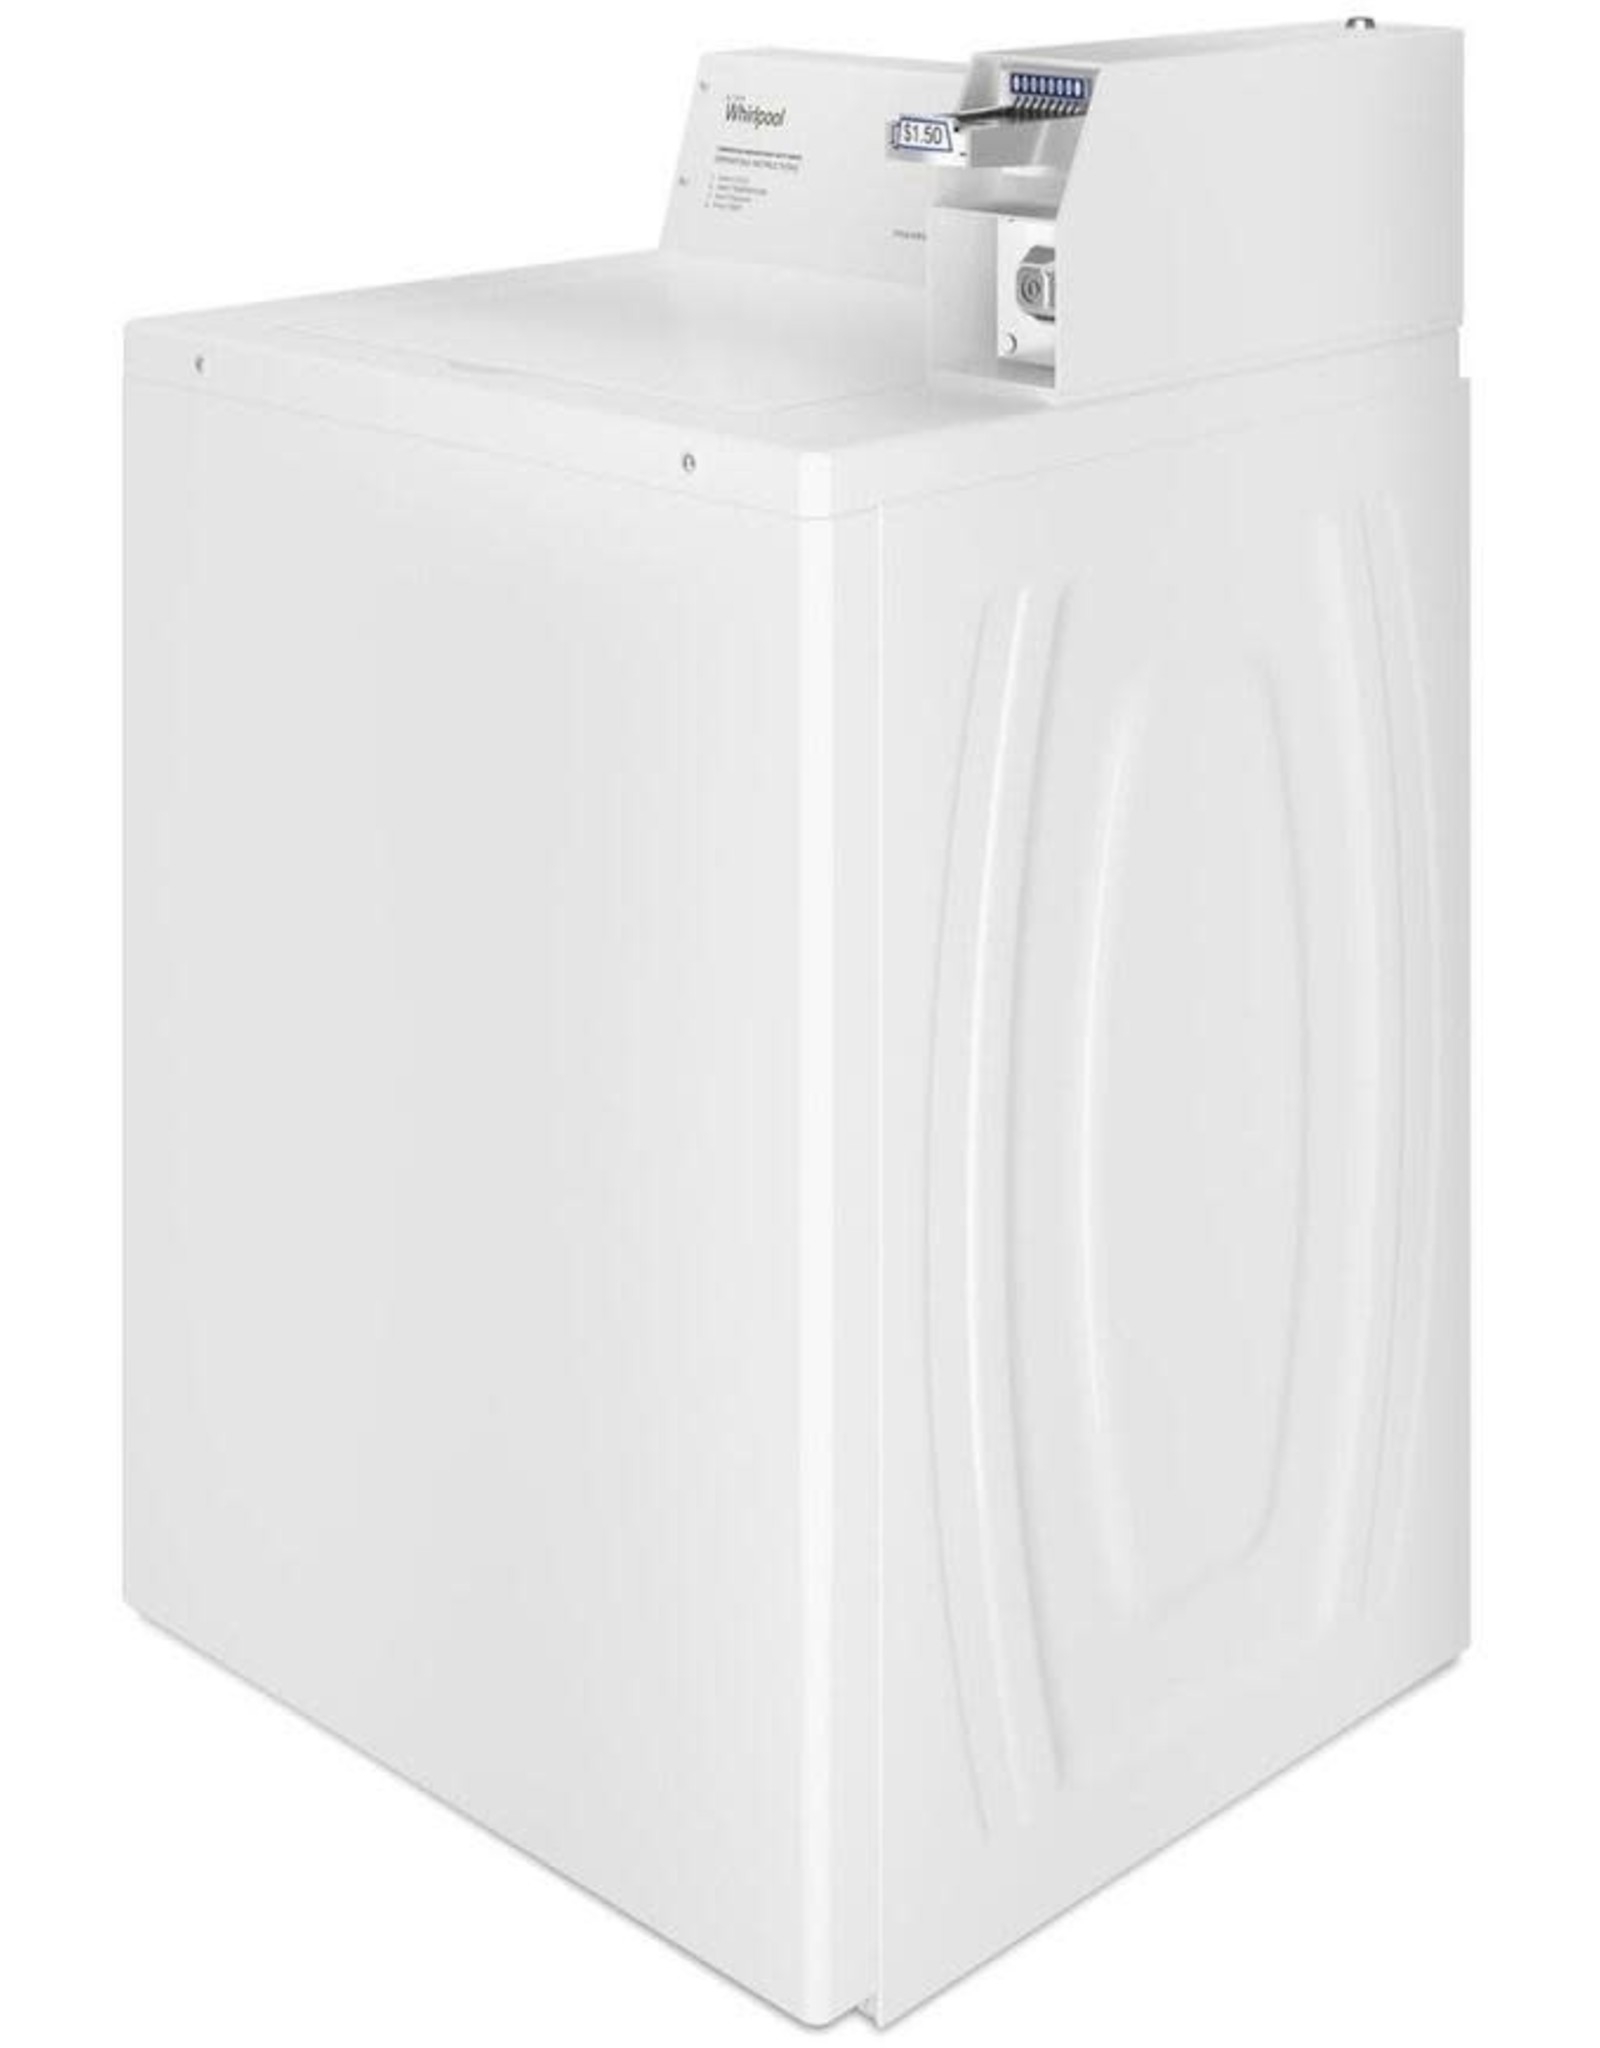 WHIRLPOOL CAE2745FQ  Whirlpool 3.3 cu. ft. White Commercial Top Load Washing Machine Coin Operated